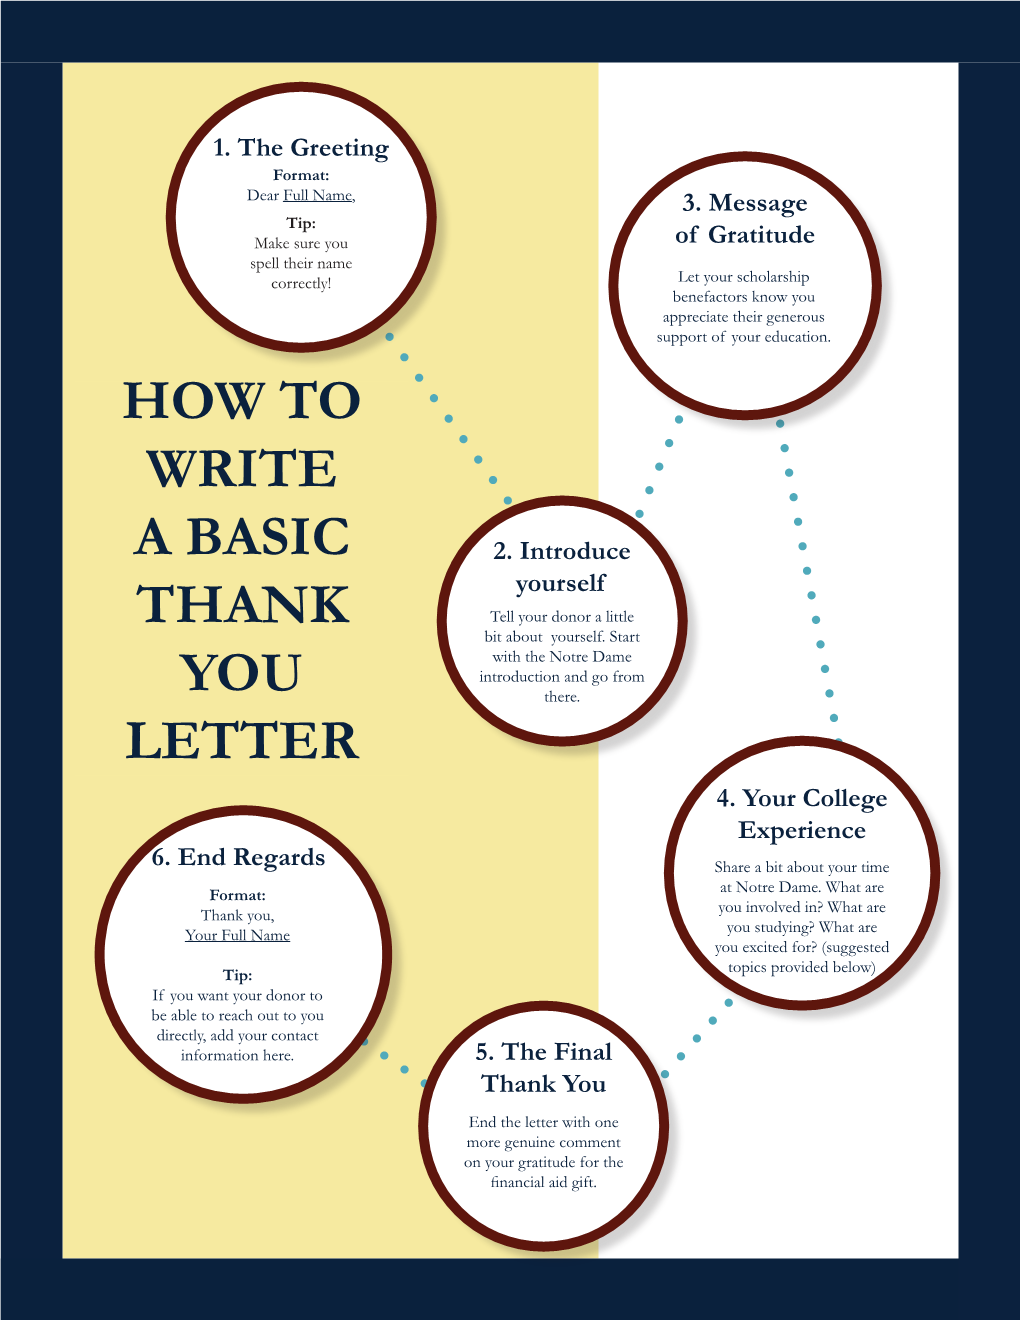 How to Write a Basic Thank You Letter